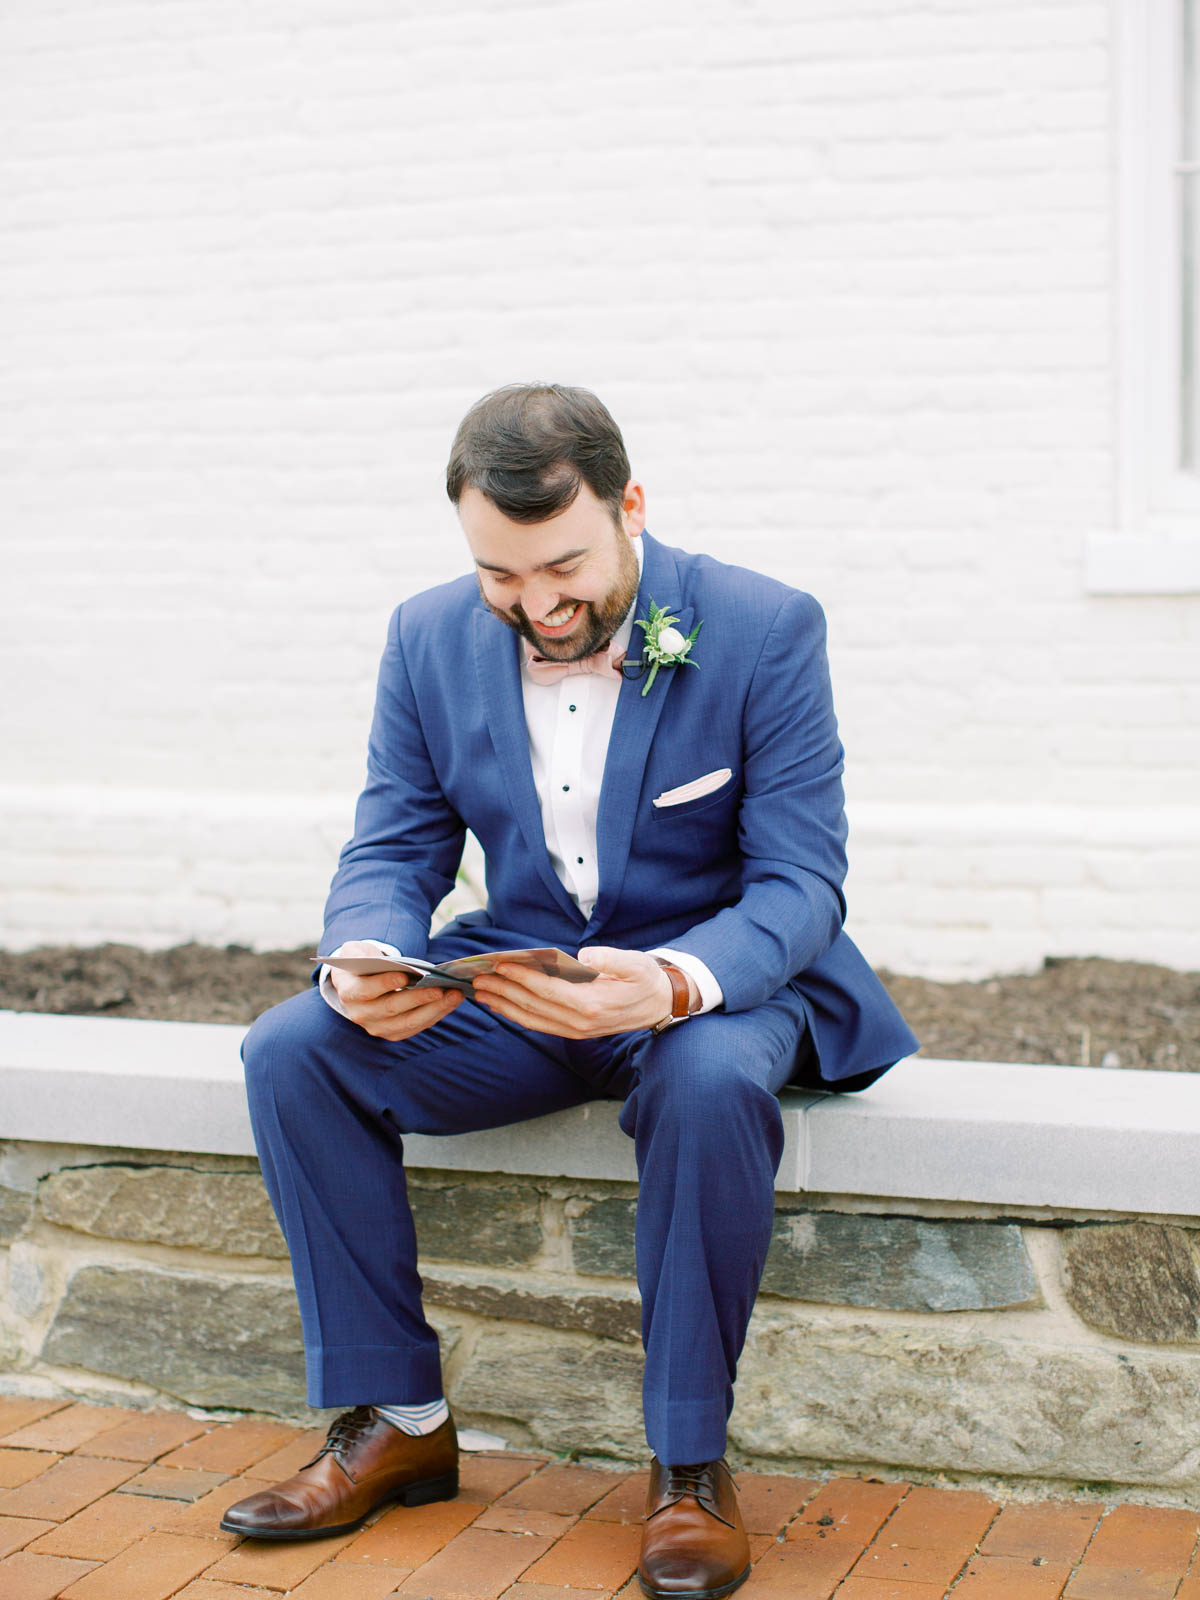 Groom reading love letter from bride on wedding day